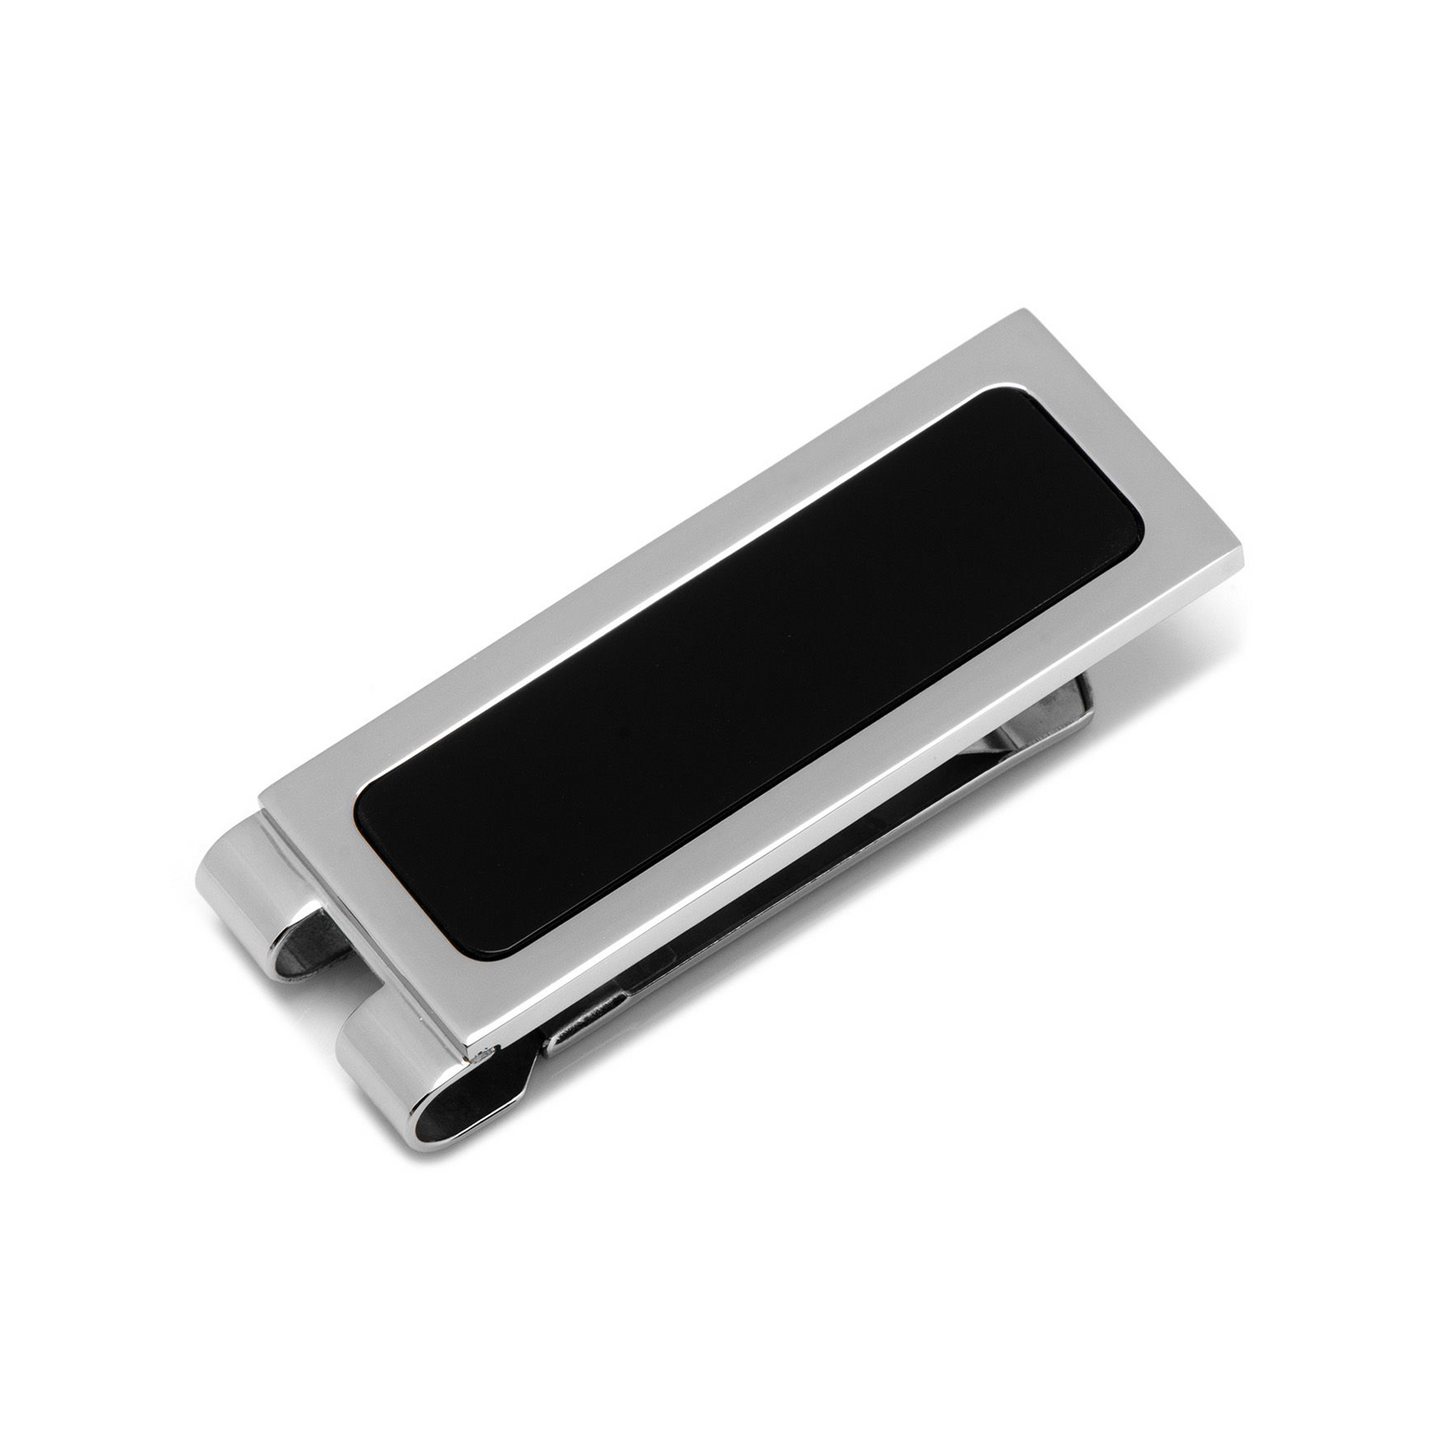 Stainless Steel Onyx Inlaid Money Clip